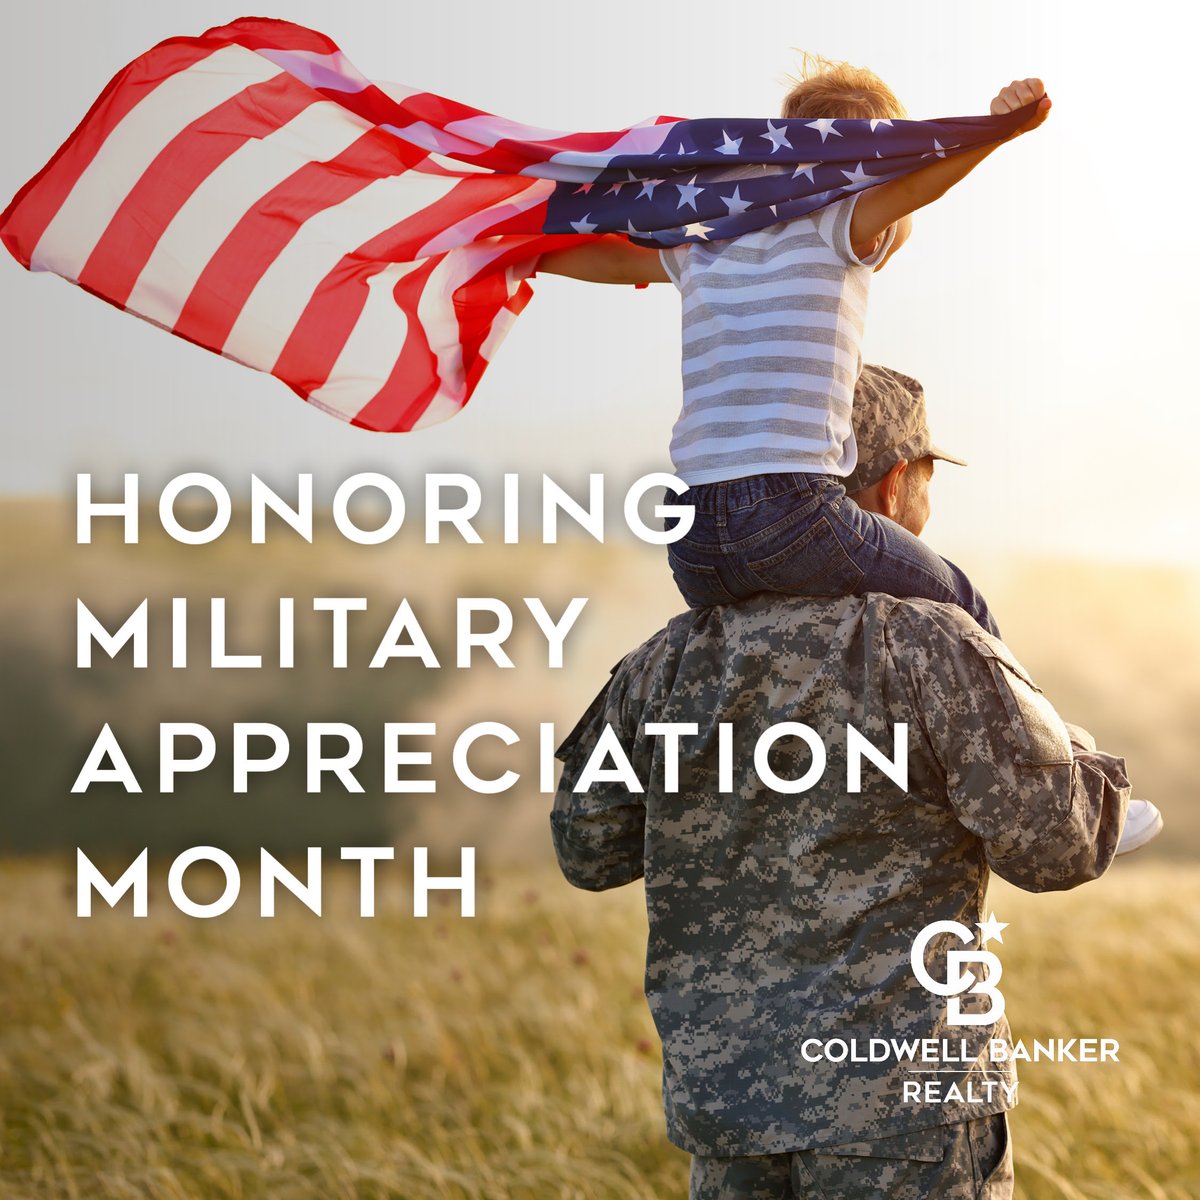 Saluting our heroes past and present during Military Heritage Month! 🇺🇸 Let's honor the bravery, sacrifice, and legacy of our servicemen and women. #MilitaryHeritageMonth #HonorOurHeroes